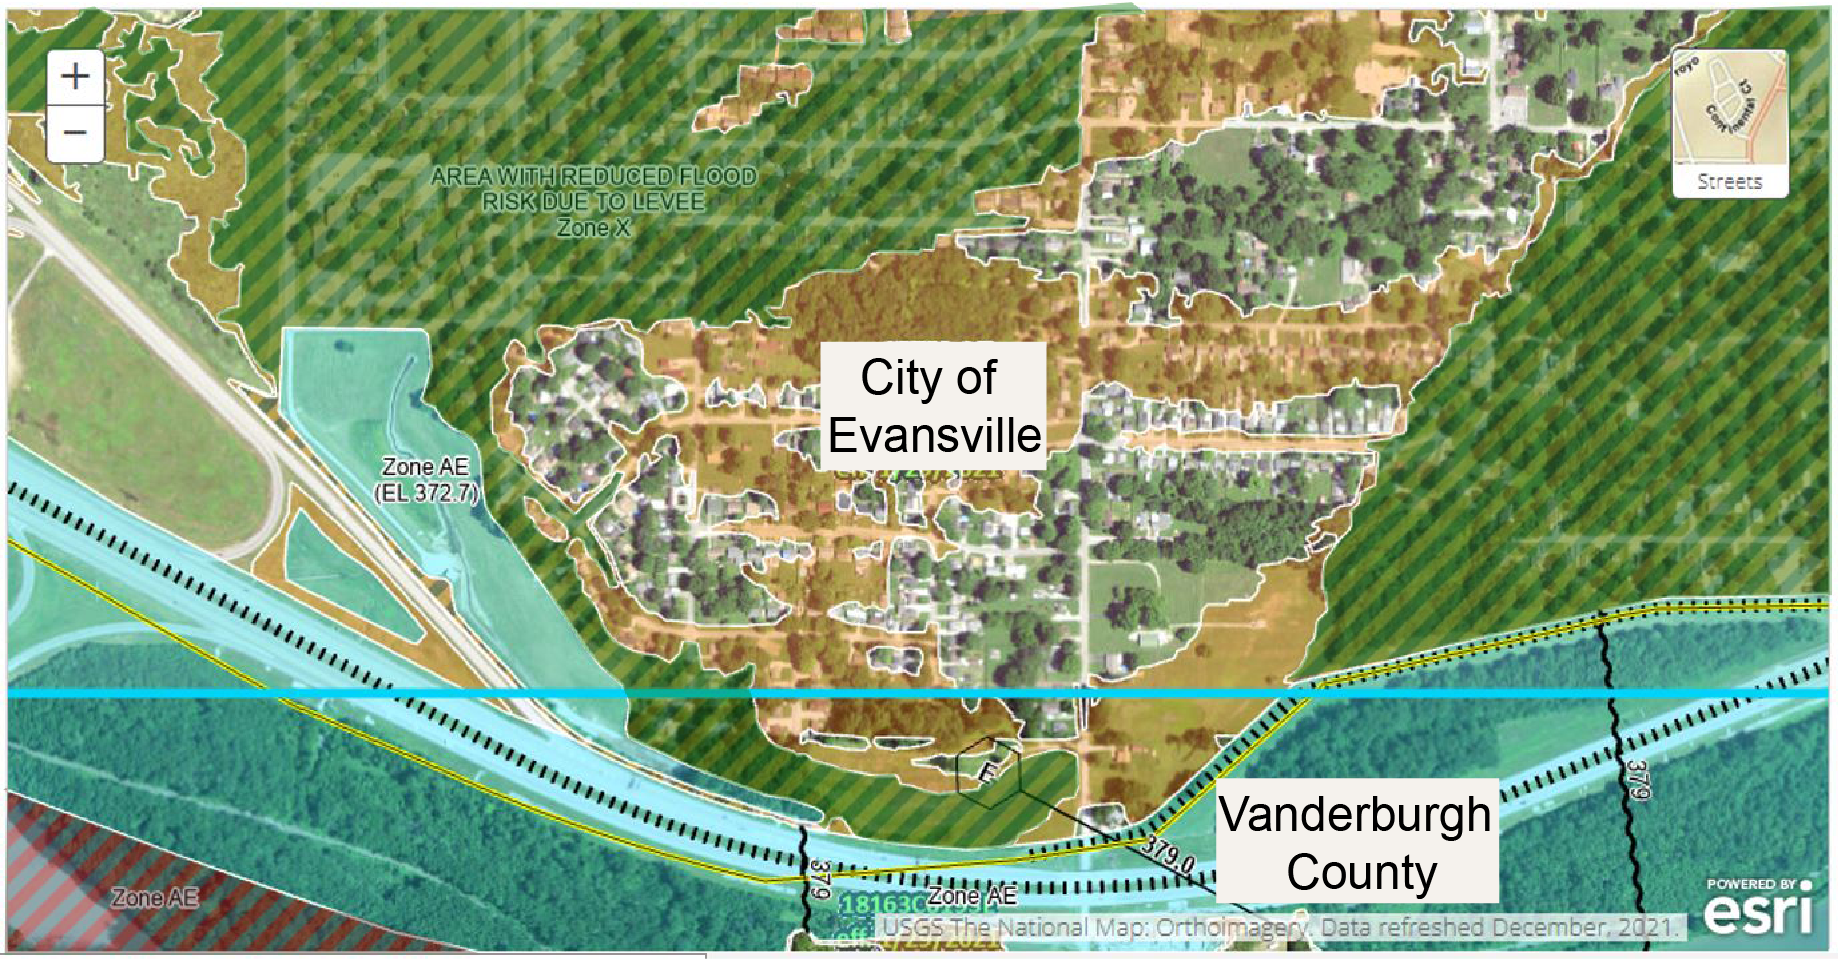 An image from FEMA’s Map Service Center showing City of Evansville, Indiana, a region along the Ohio River with a small flood hazard area and a large 500-year flood zone.